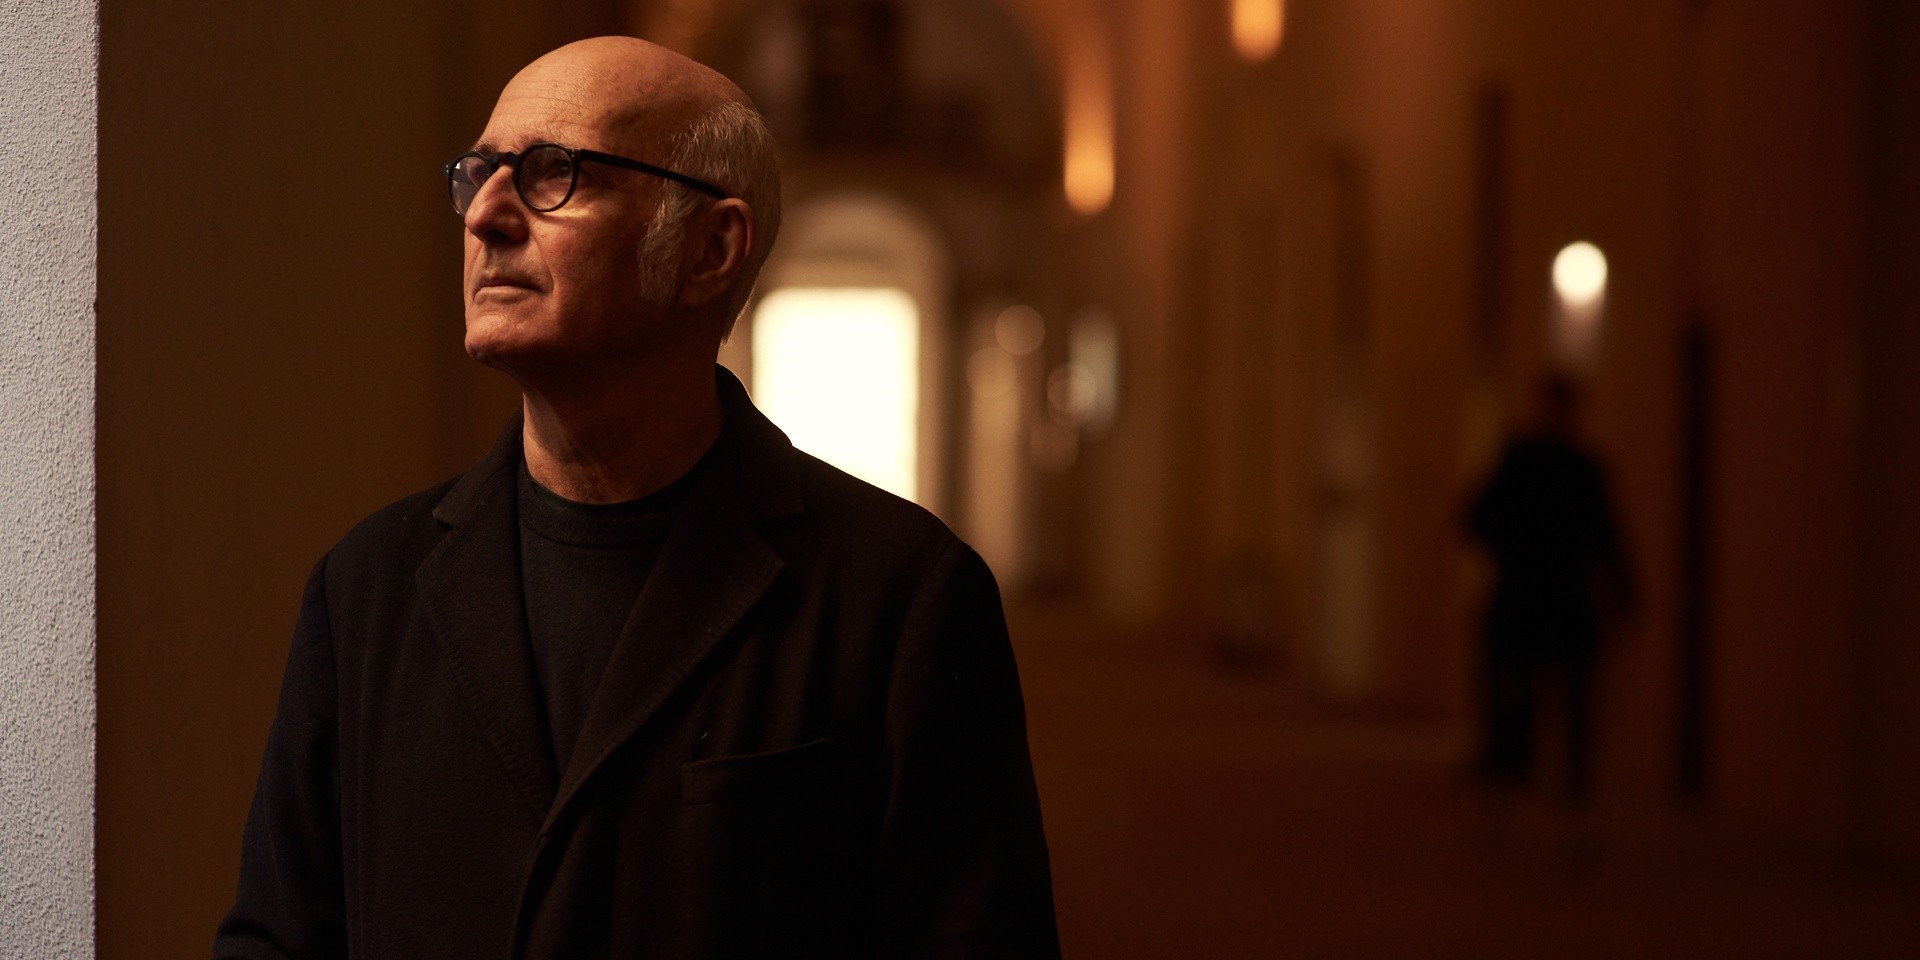 Watch Ludovico Einaudi Perform 'Ascent (Day 4)' Live In The Studio